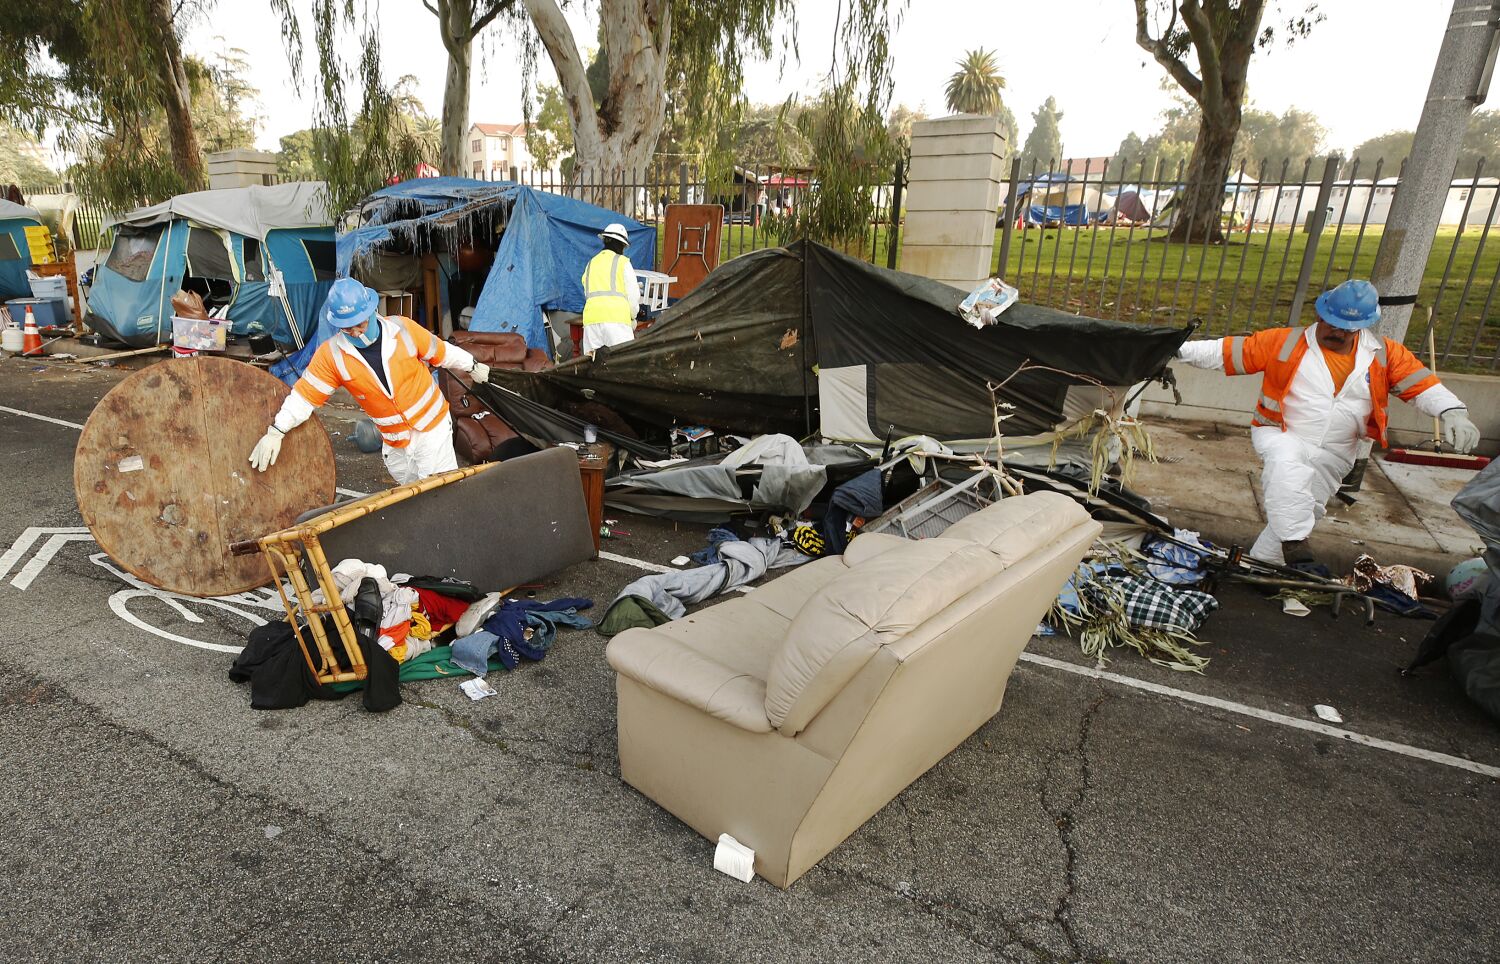 Column: Newsom talked tough with mayors and supervisors on homelessness. Did it work?